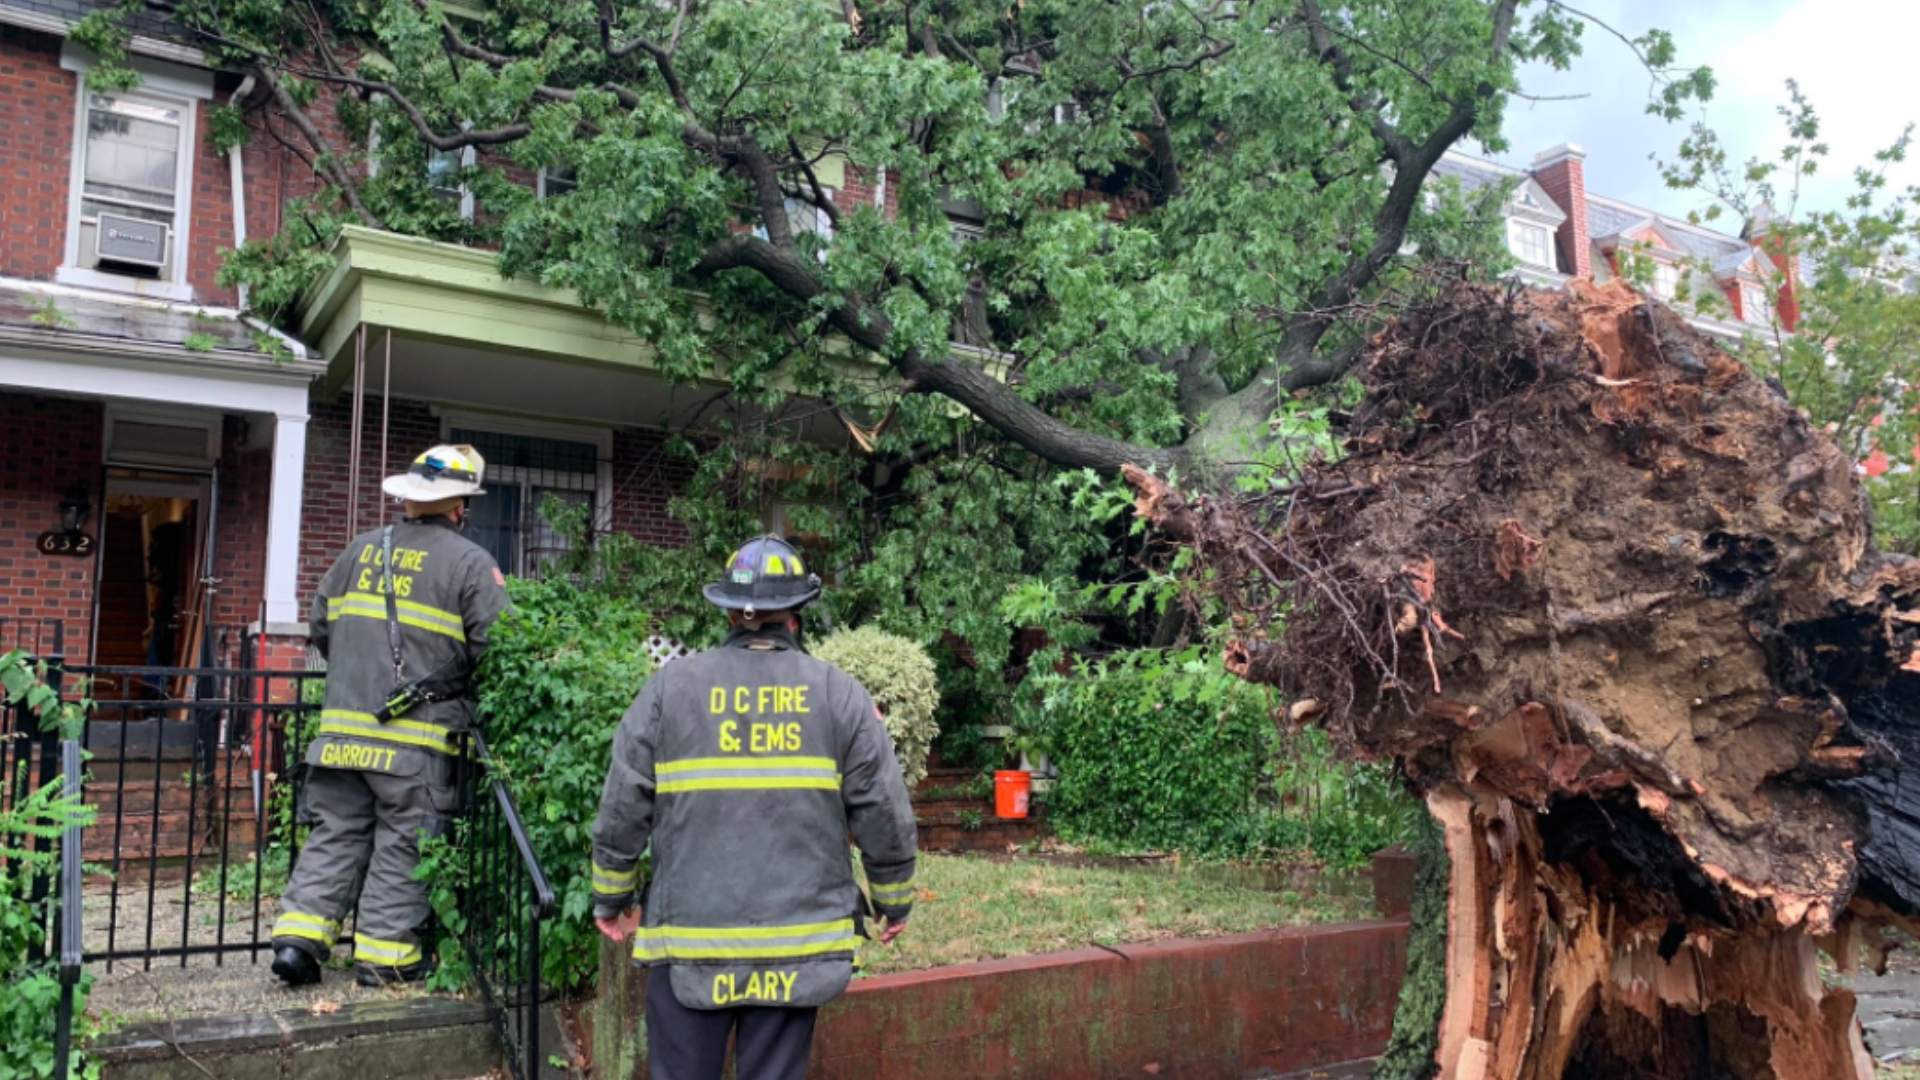 Angry residents say DC ignored obvious signs that could have prevented tree disaster